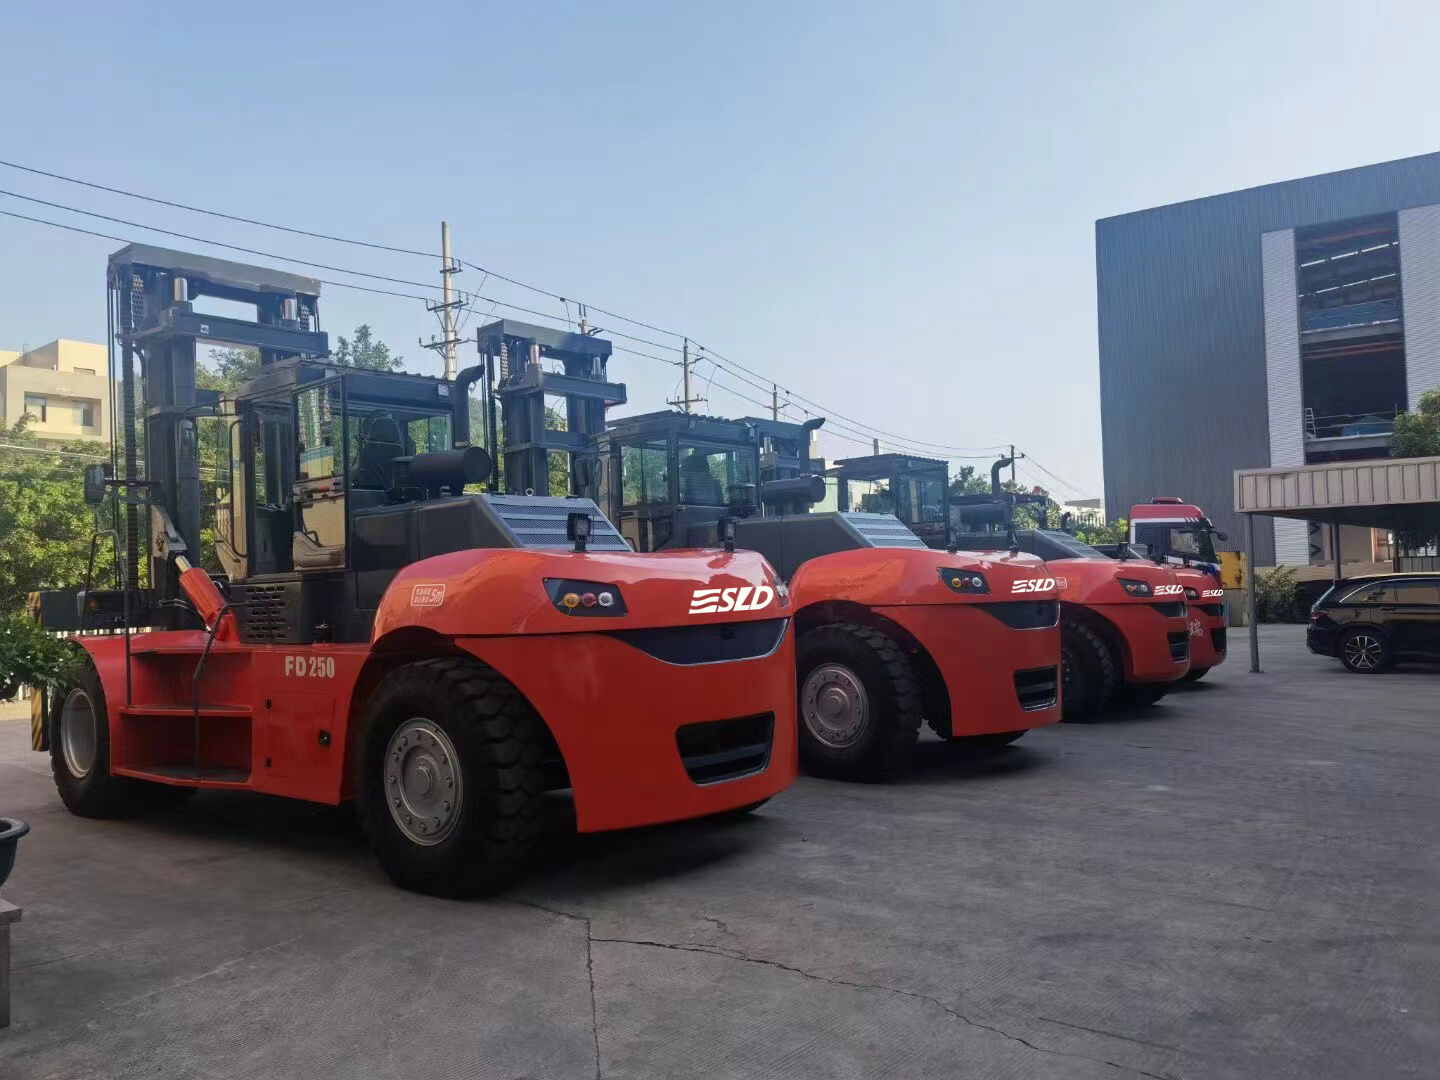 China SLD brand 20 ton,25 ton forklifts are ready for delivery